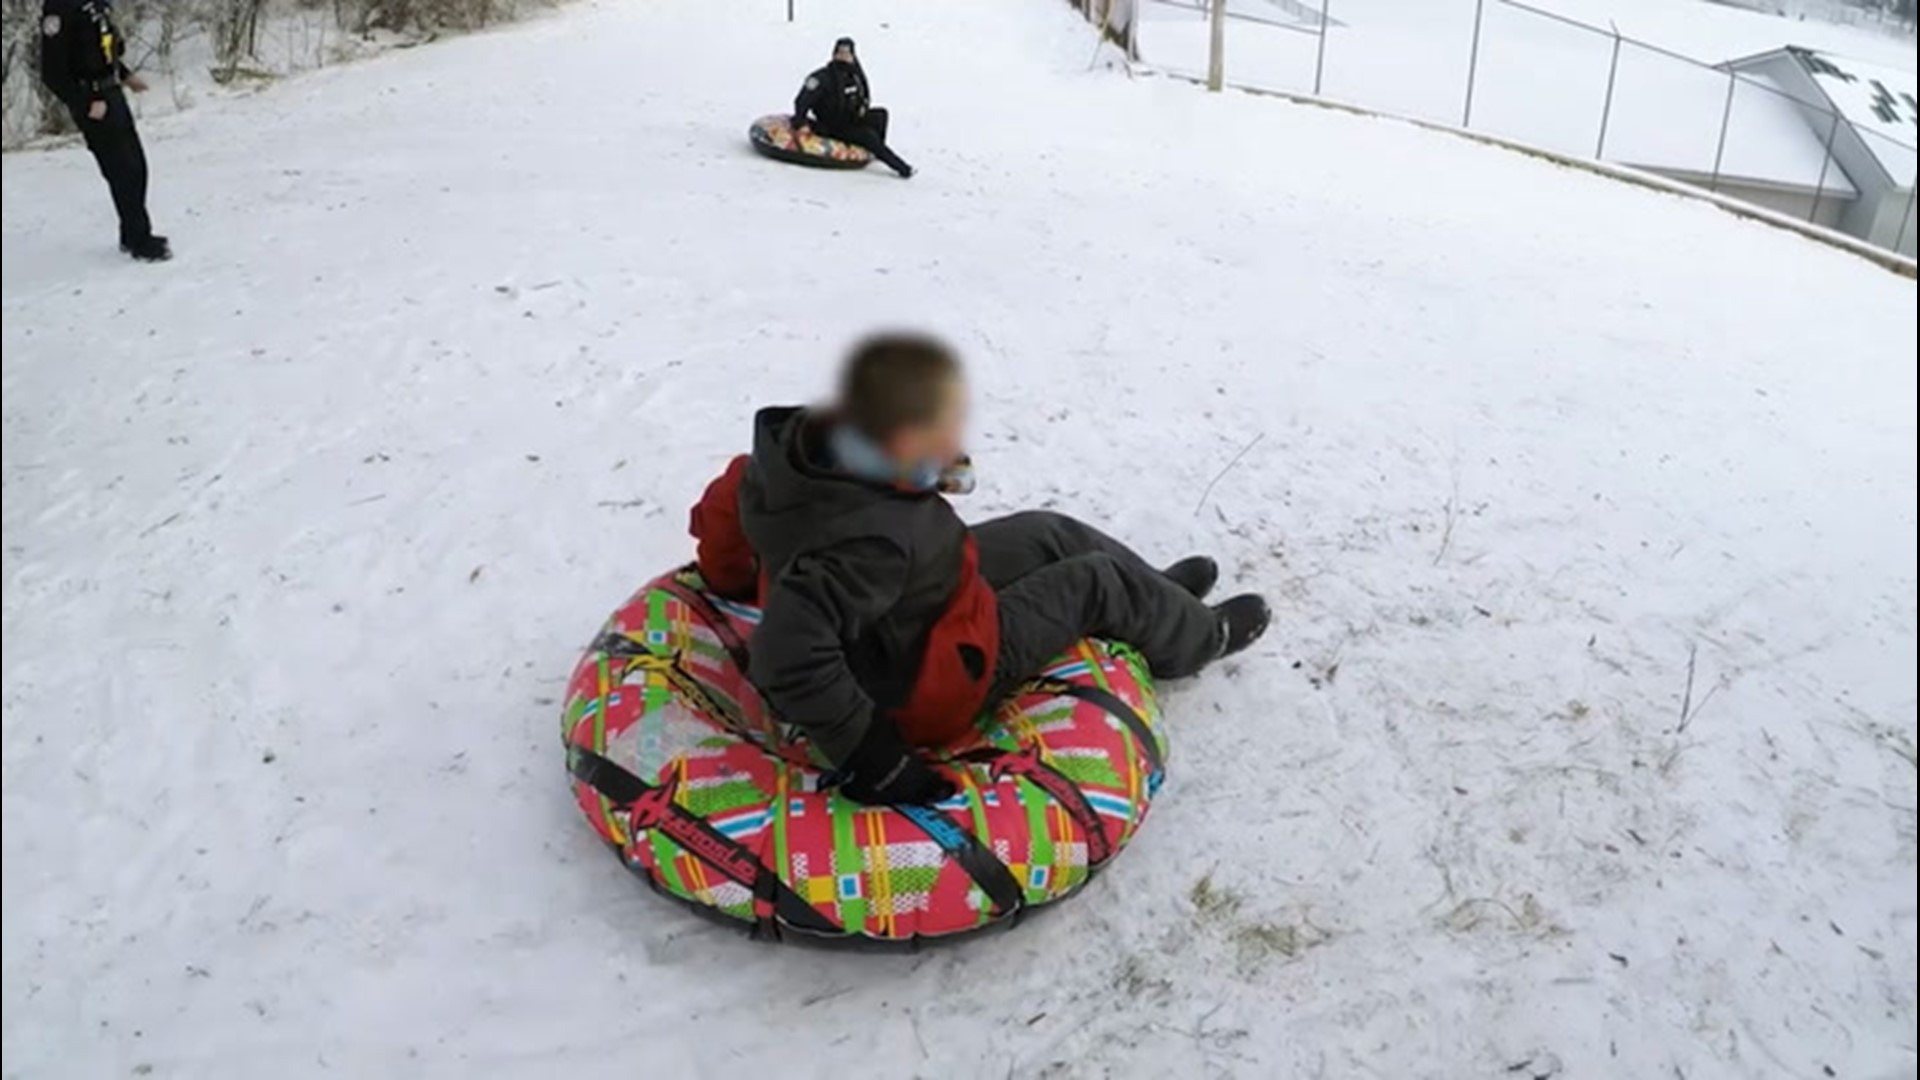 Even police officers must have some fun. Watch as a group of officers join some kids for some friendly competition as they race down the snowy hill in Wausau, Wisconsin, on Jan. 20.